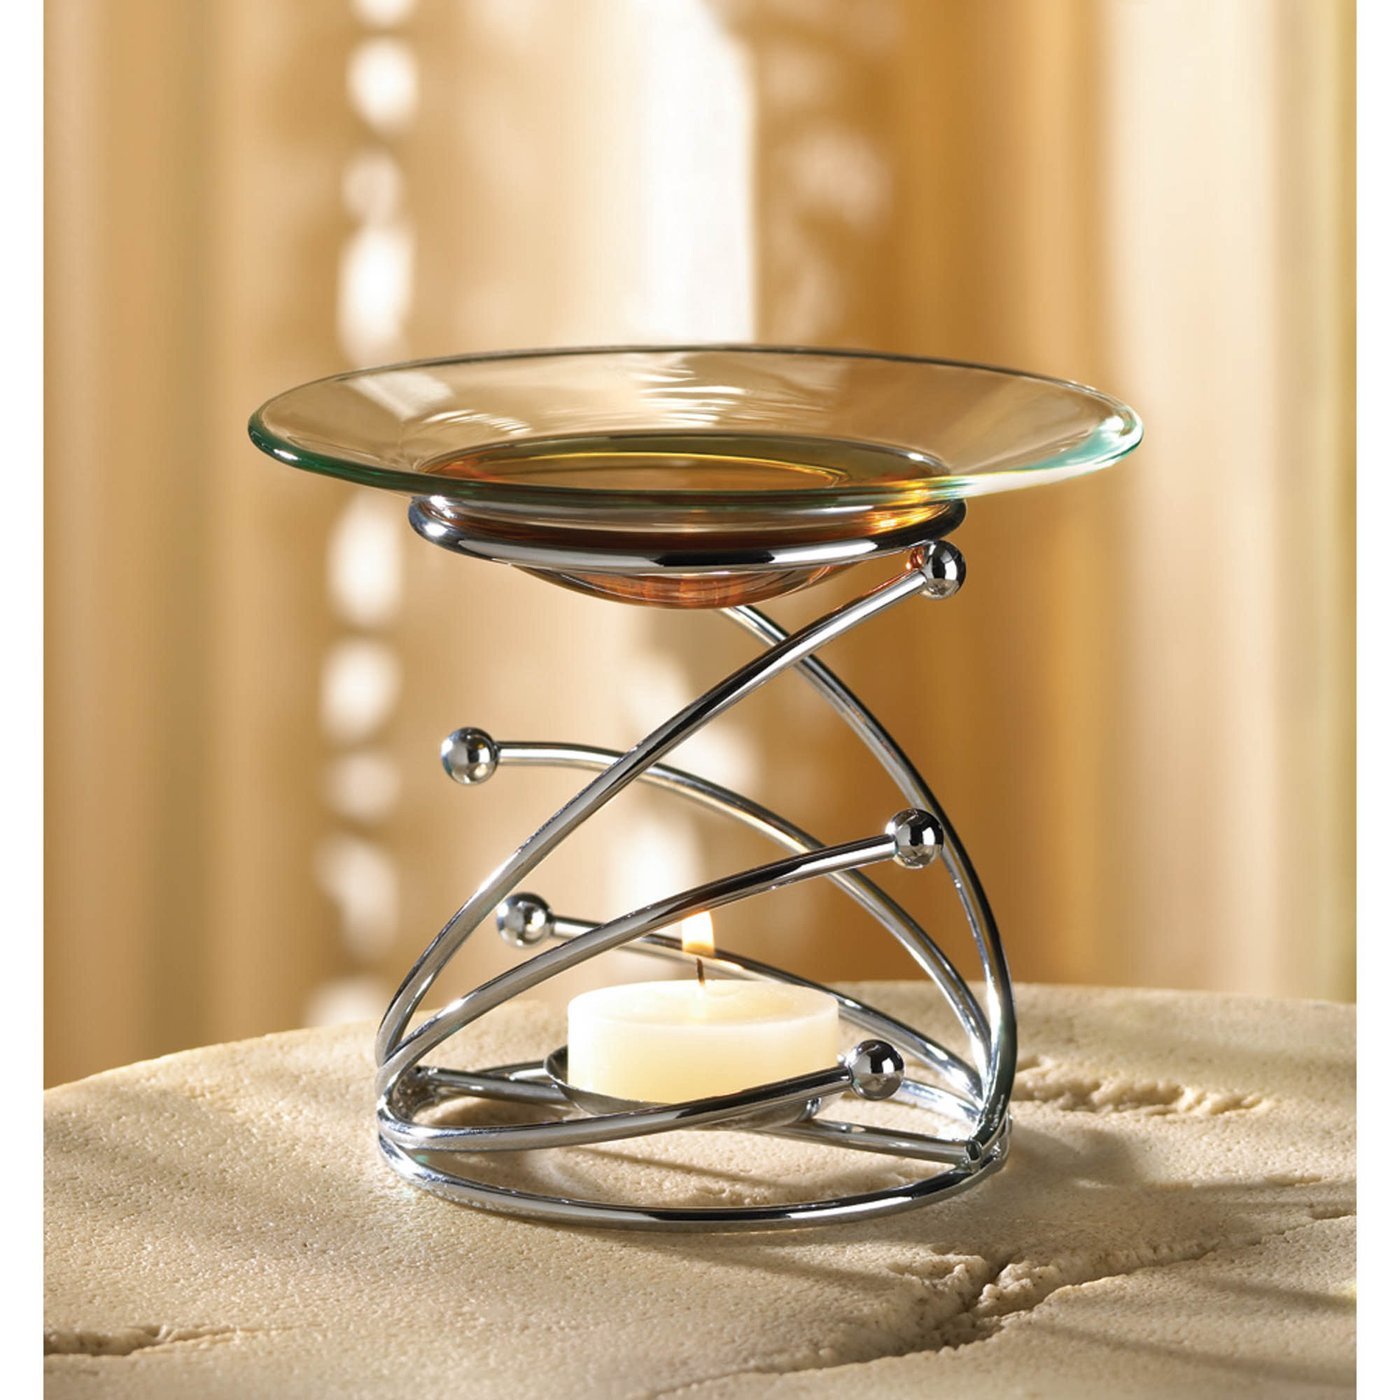 Primary image for SWIRL OIL WARMER